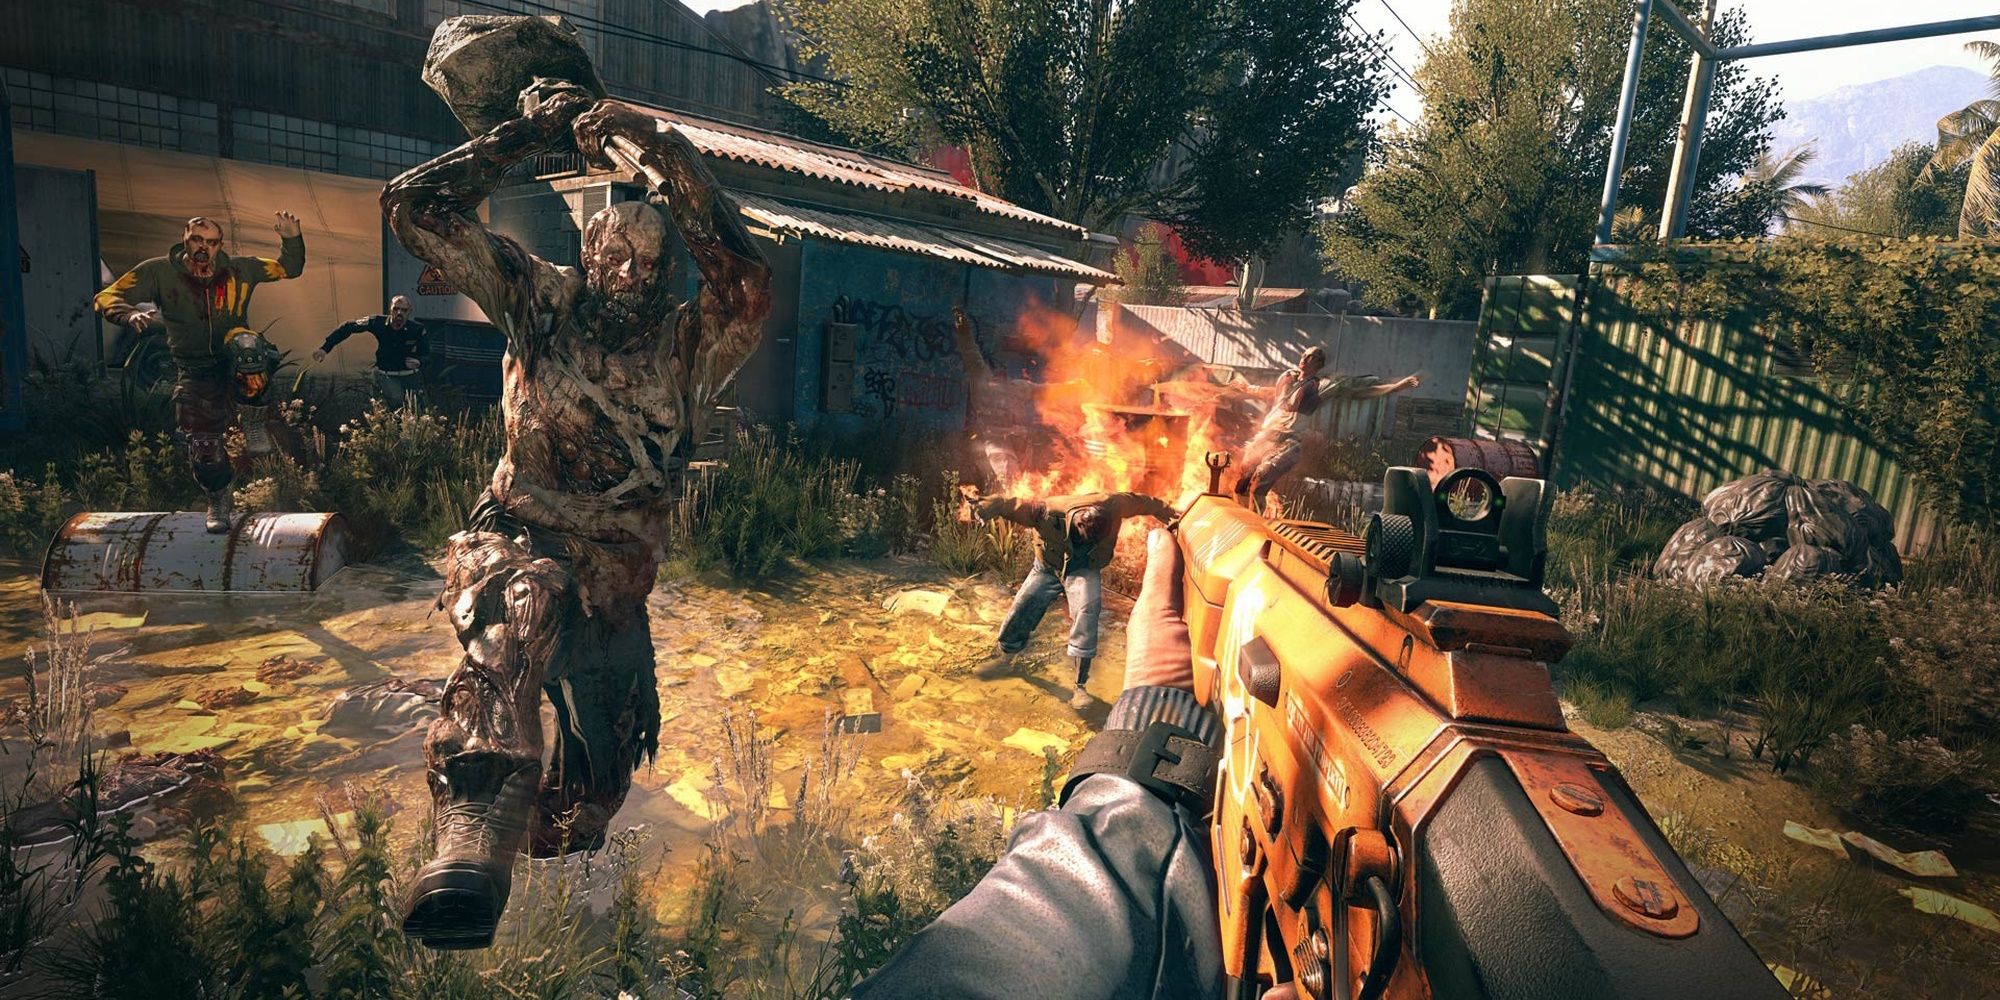 Zombies attacks a survivor who's holding an assault rifle in Dying Light